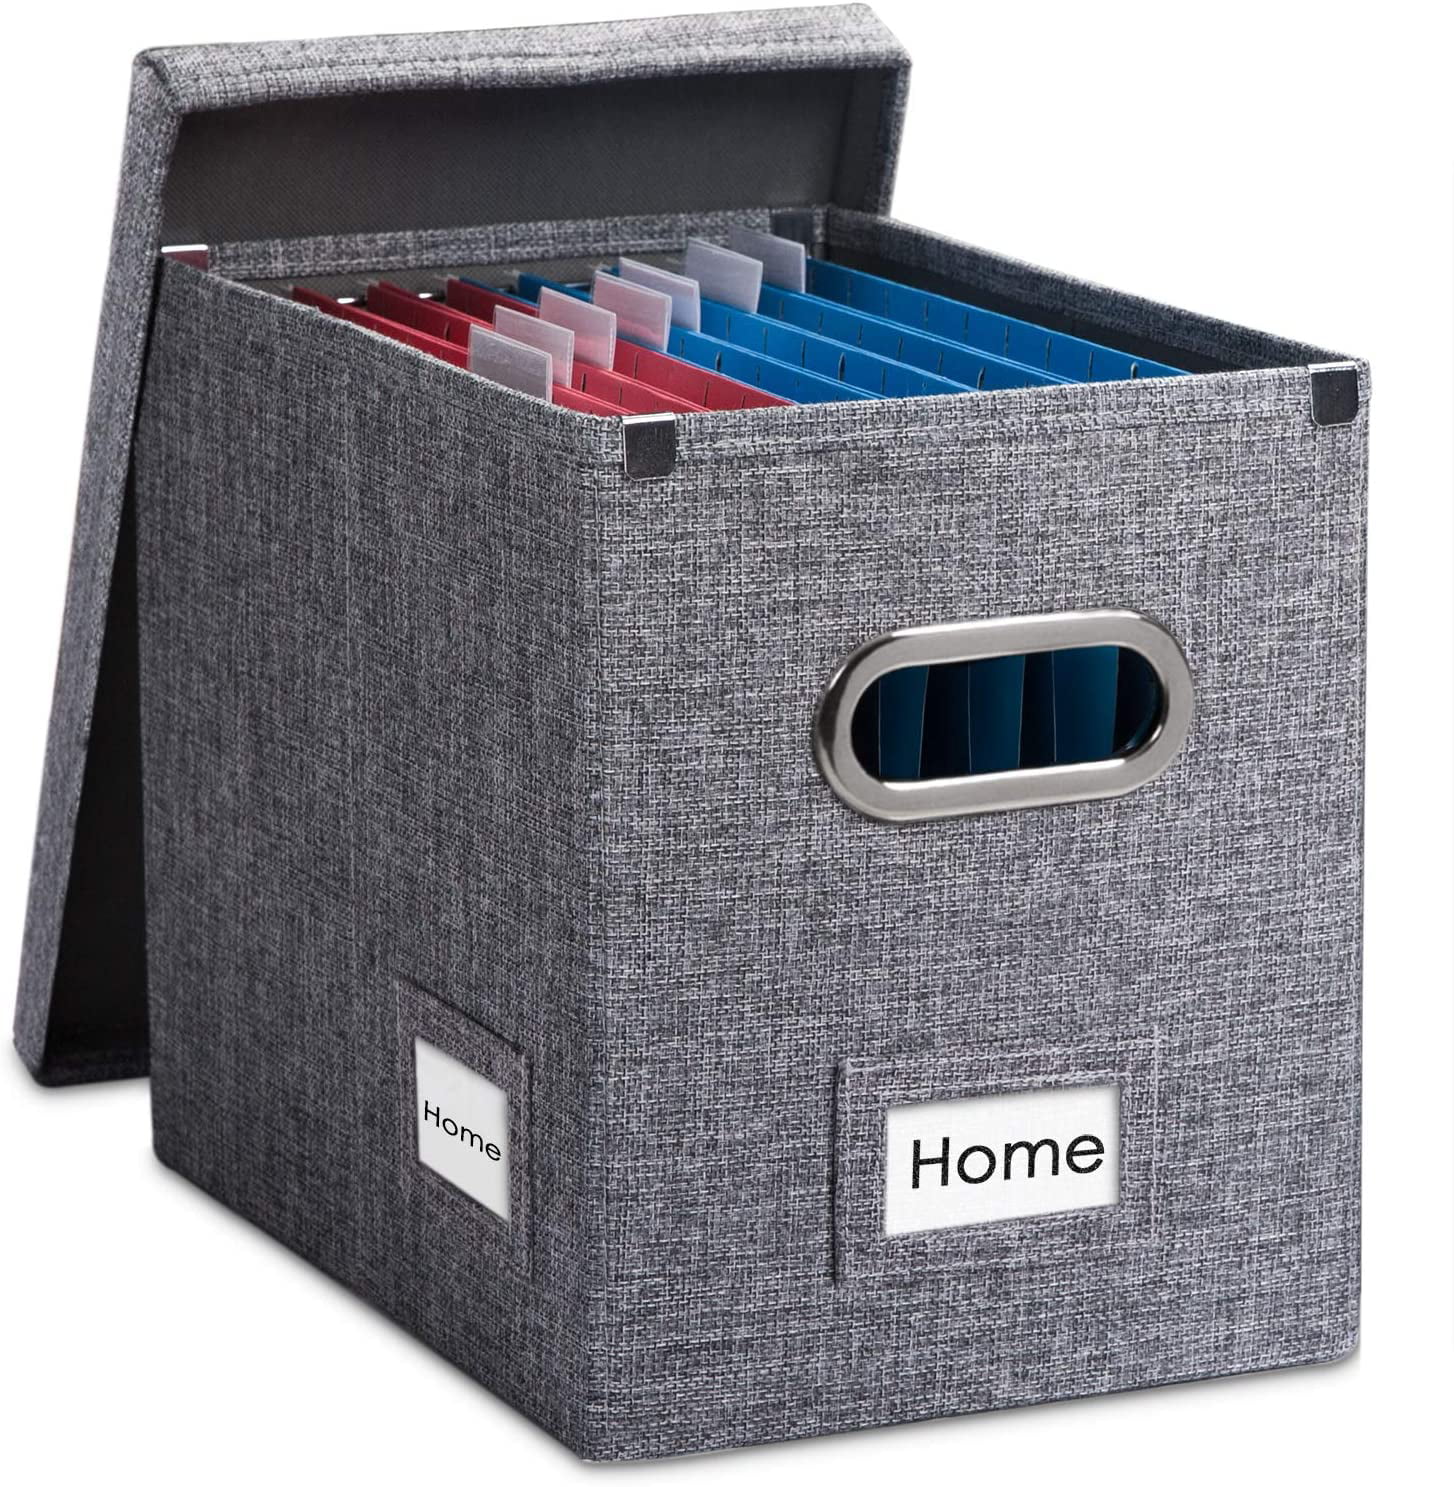 Hanging File Box Paper Organizer Box s Best Linen File Box Organizer with a Smooth Rail Filing System File Folder Organizer Document Organizer Collapsible File Storage 